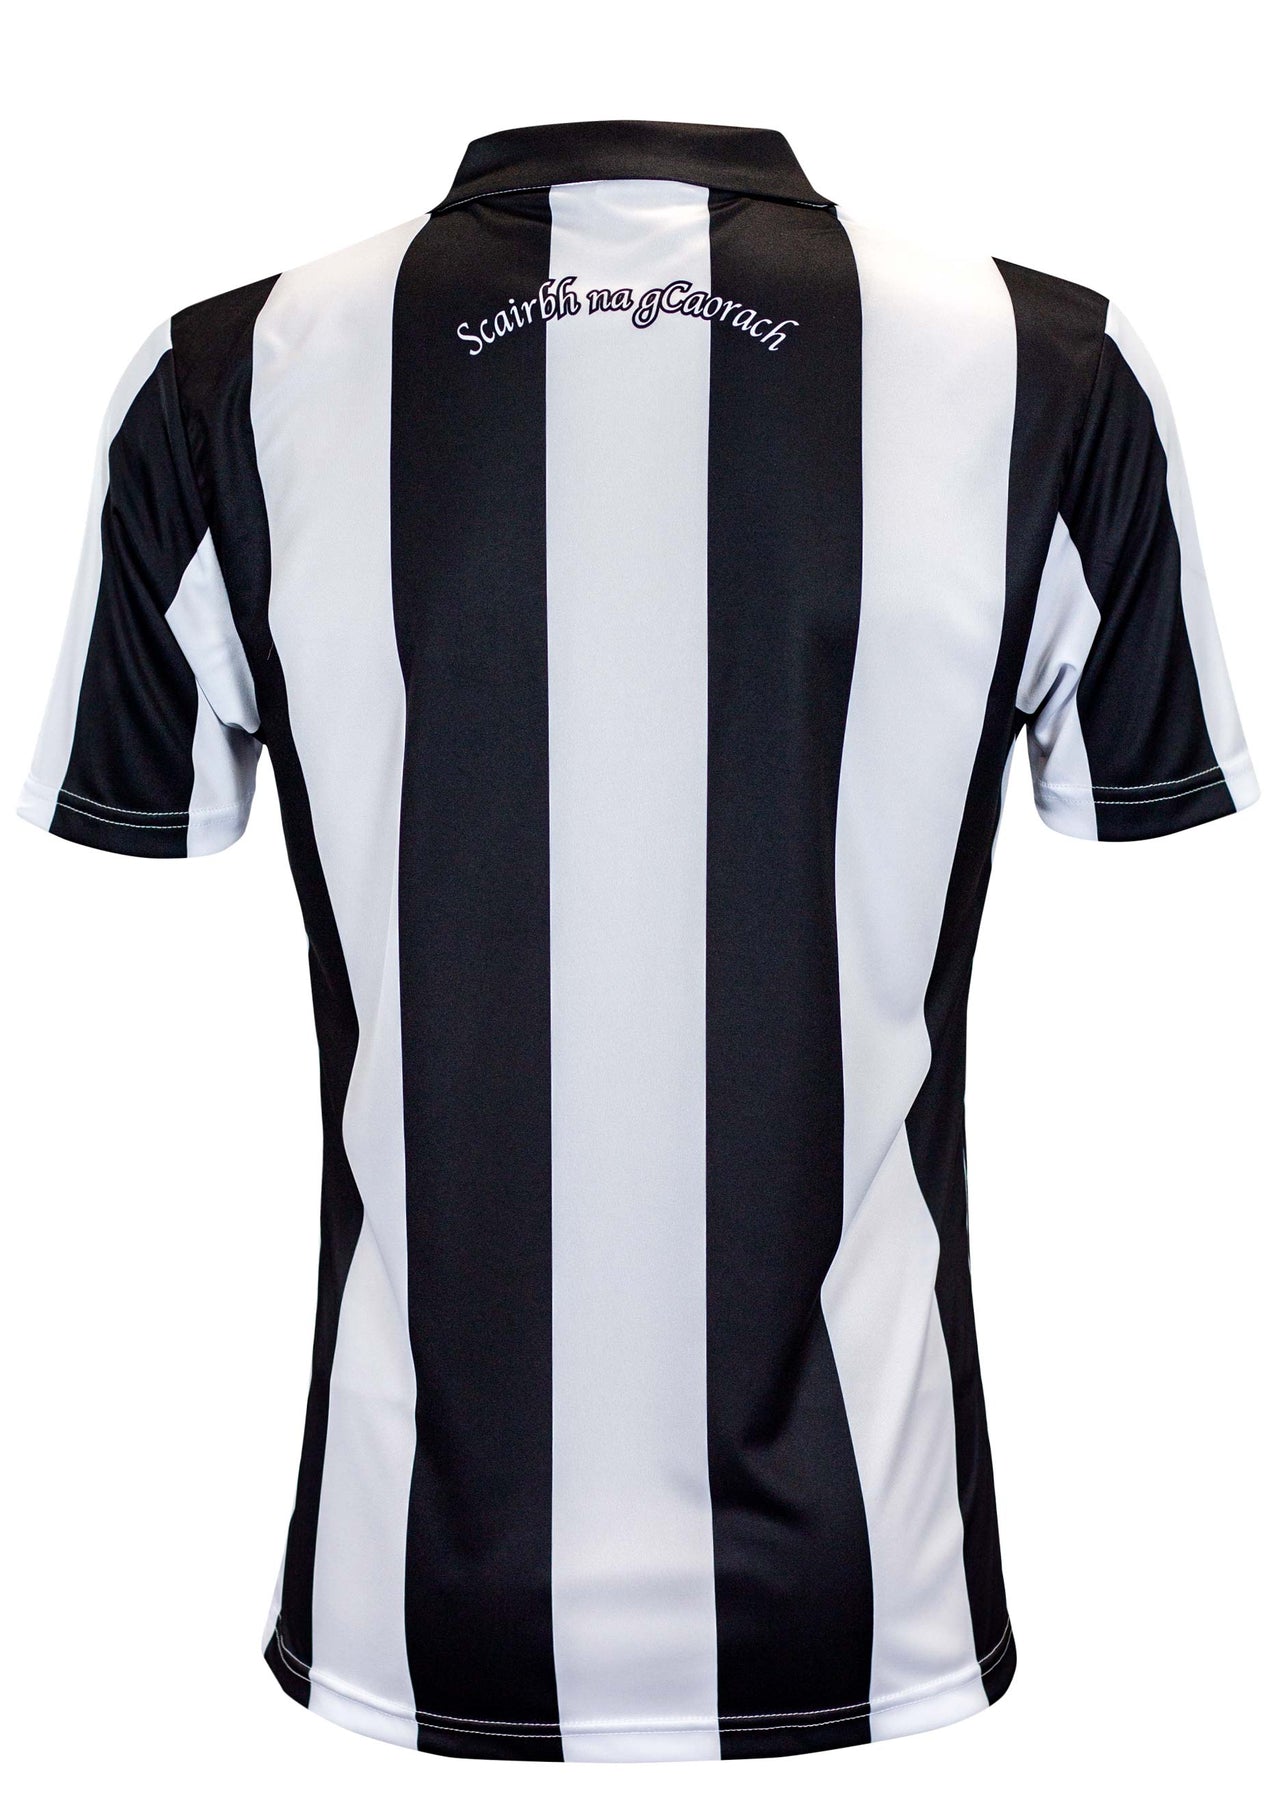 Emyvale GAA Retro Hooped Jersey Player Fit Adult